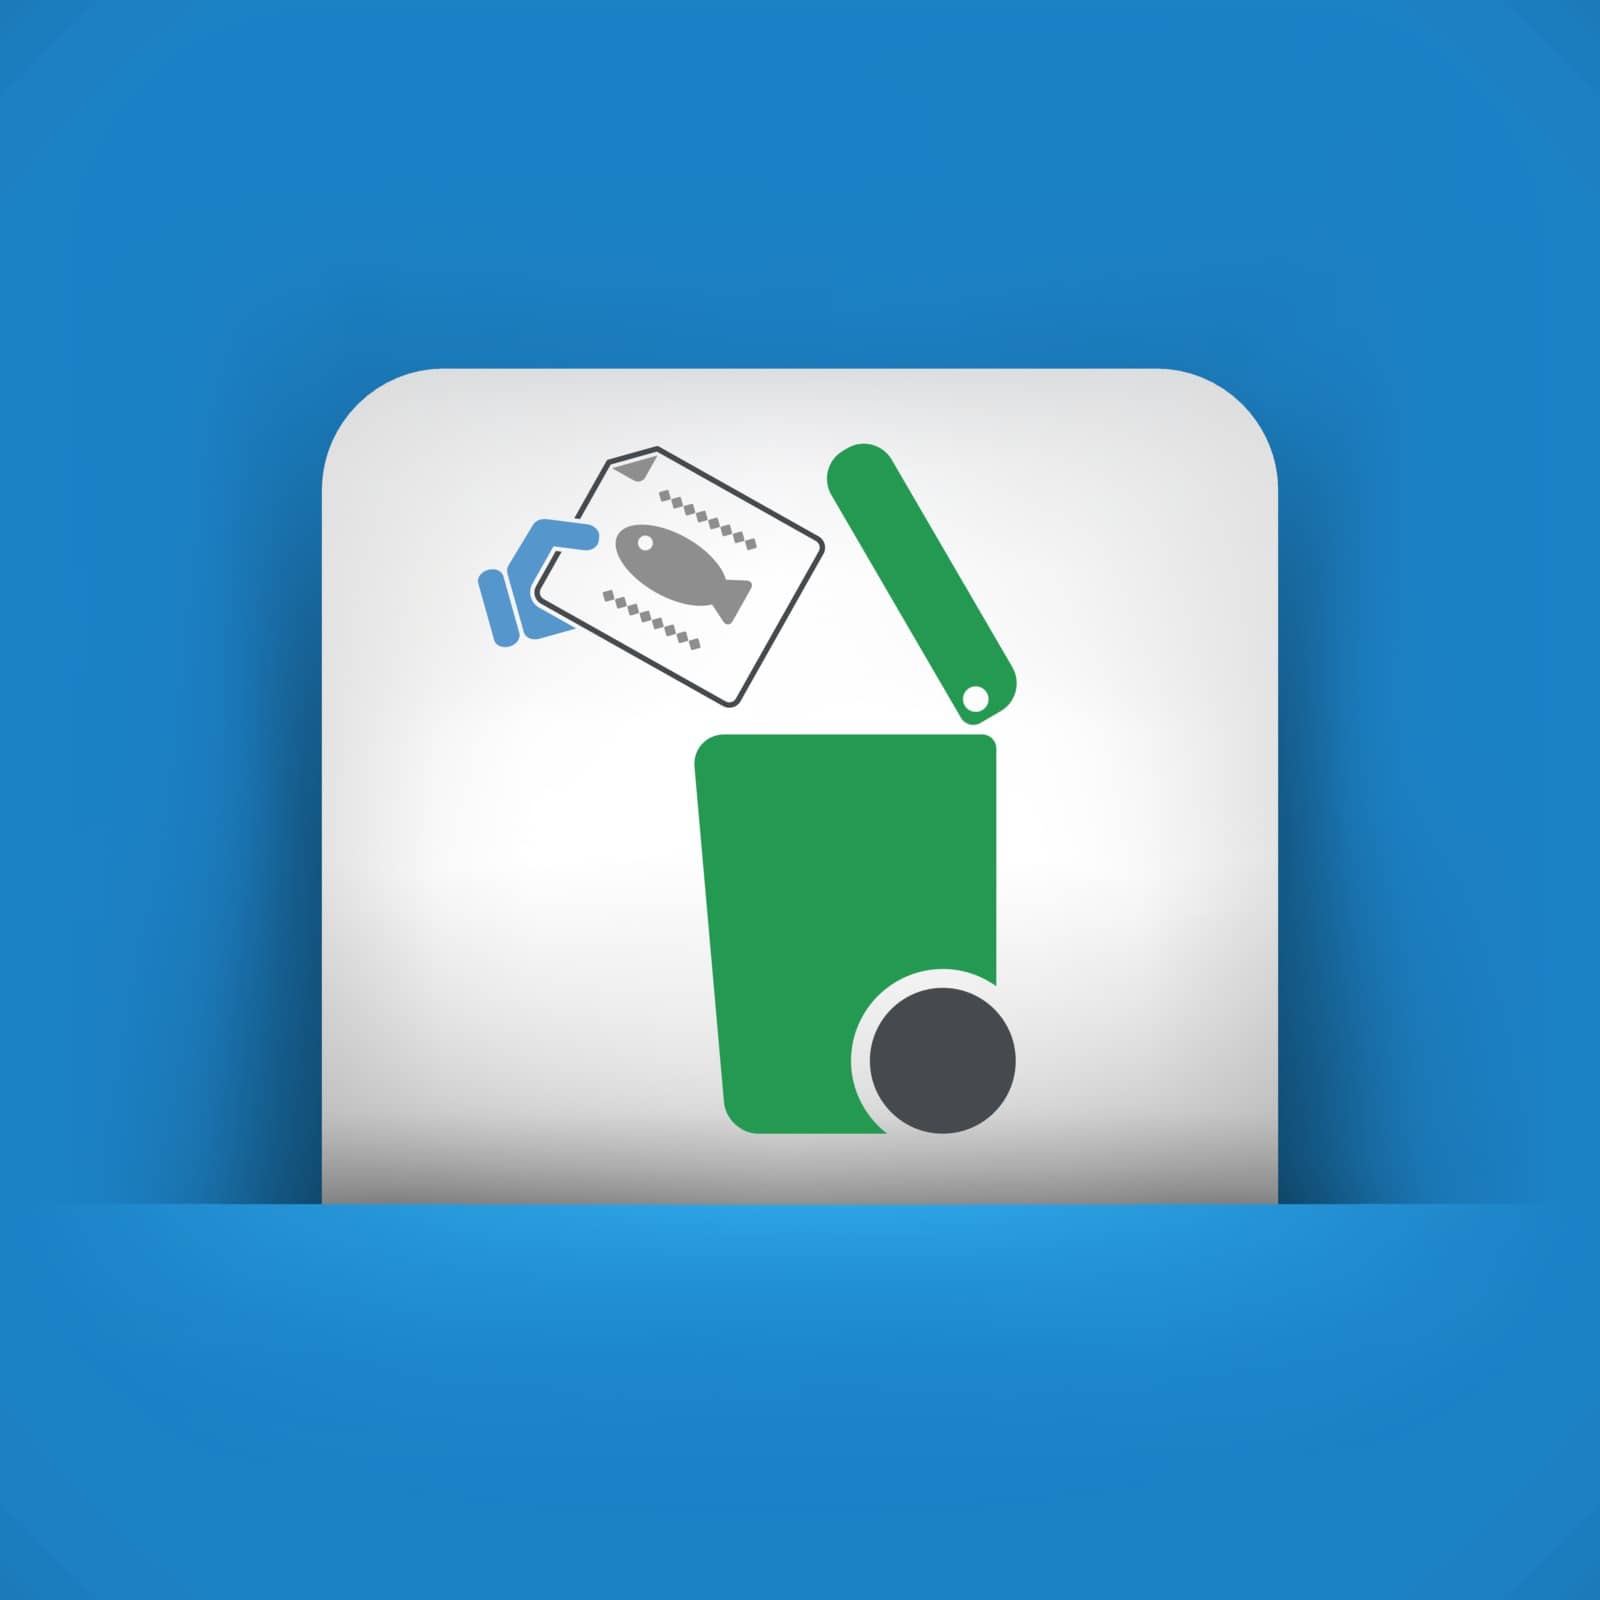 Separate waste collection icon by myVector